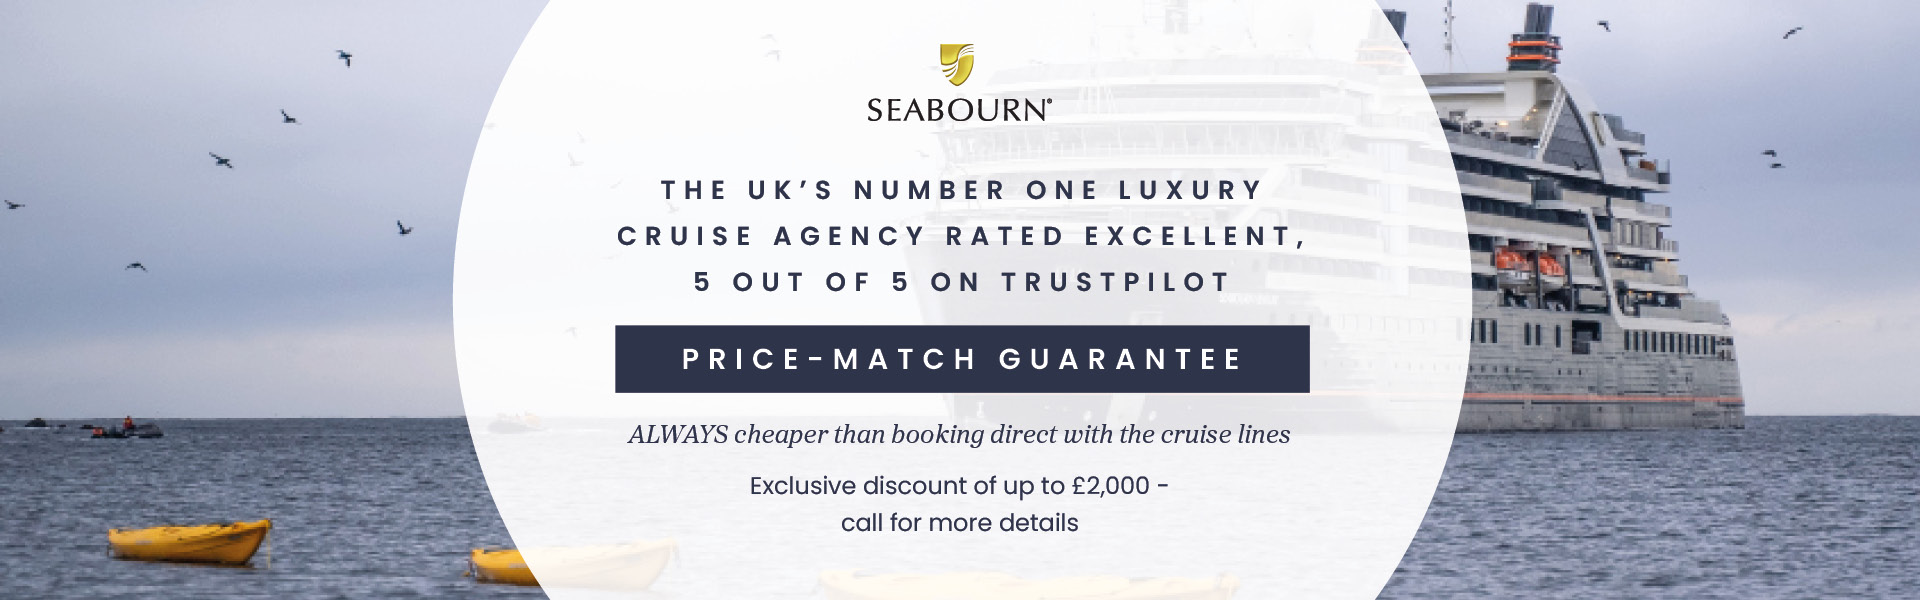 Why Book Seabourn With Panache Cruises